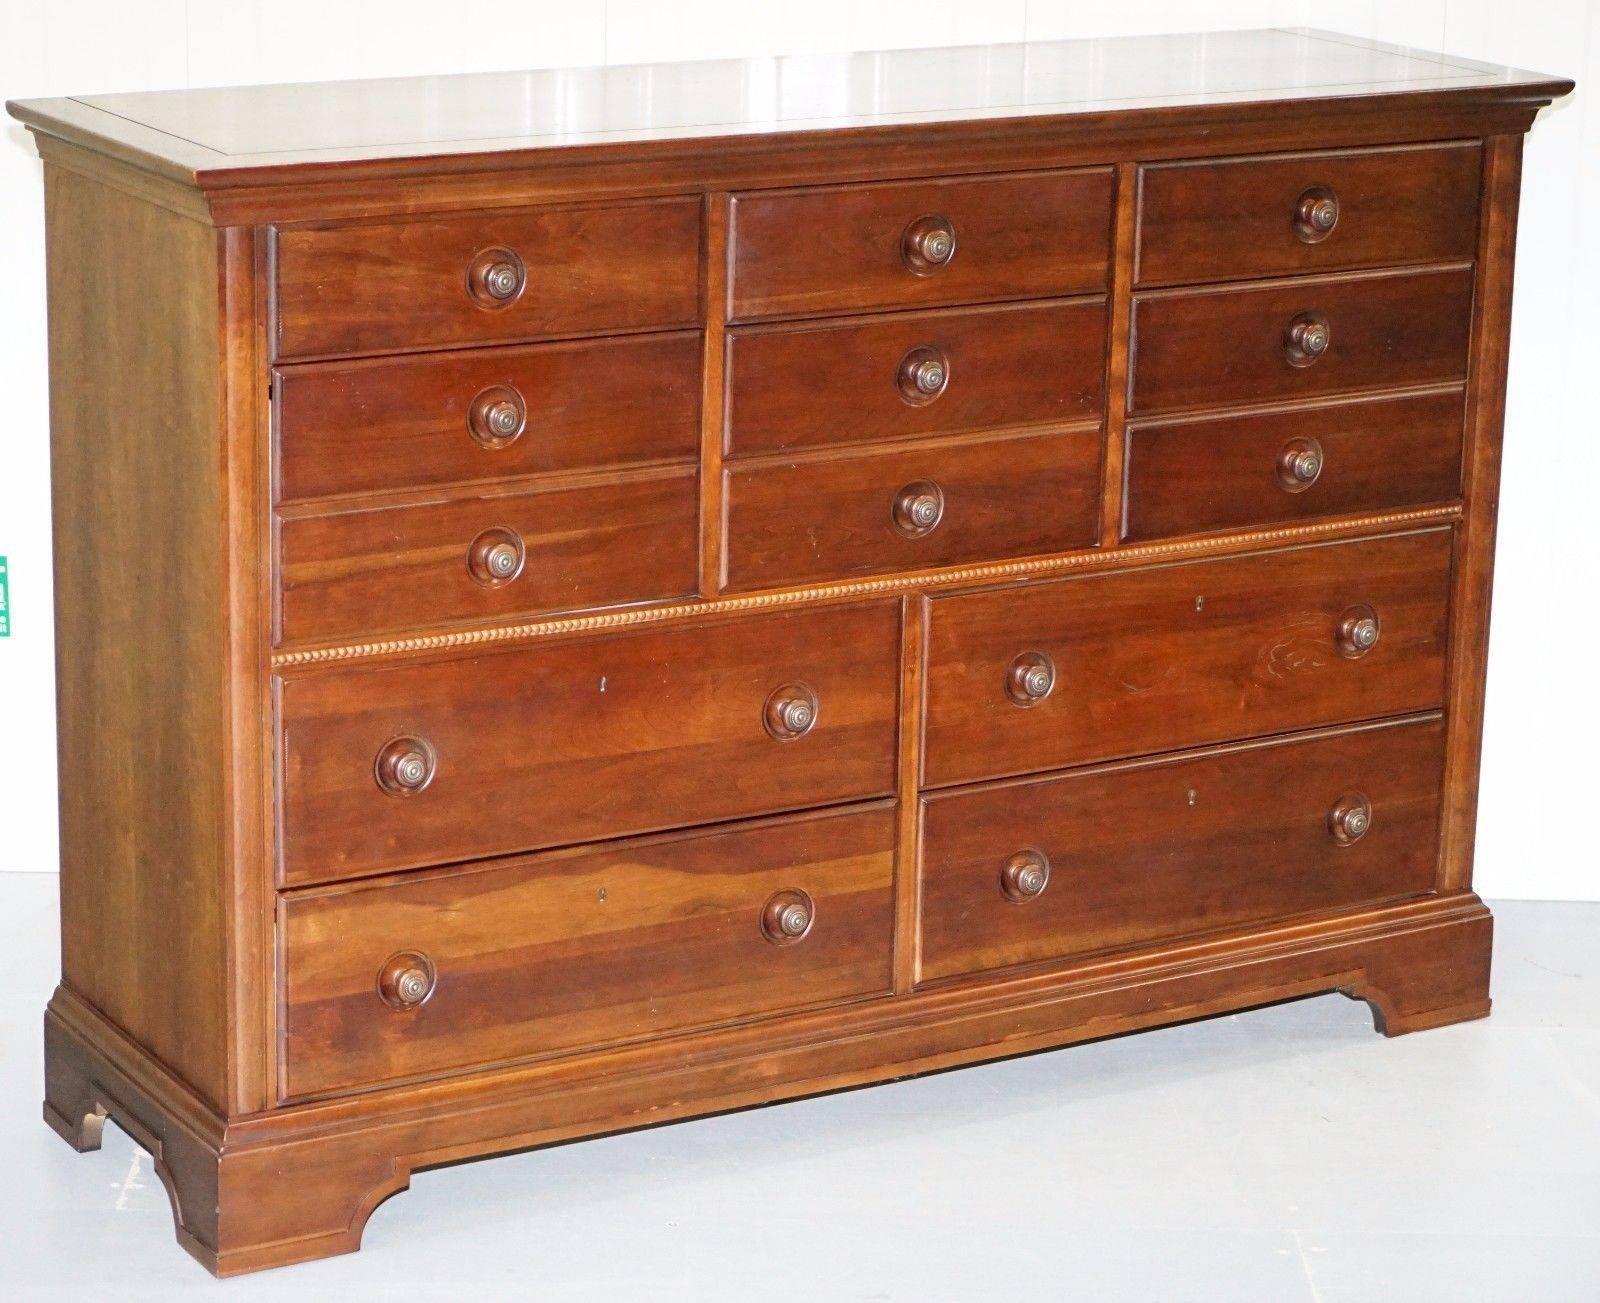 Lovely Stanley furniture large bank of drawers with mirror

Please note the delivery fee listed is just a guide, for an accurate quote please send me your postcode and I’ll price it up for you

This is part of a set, I have the matching bedside